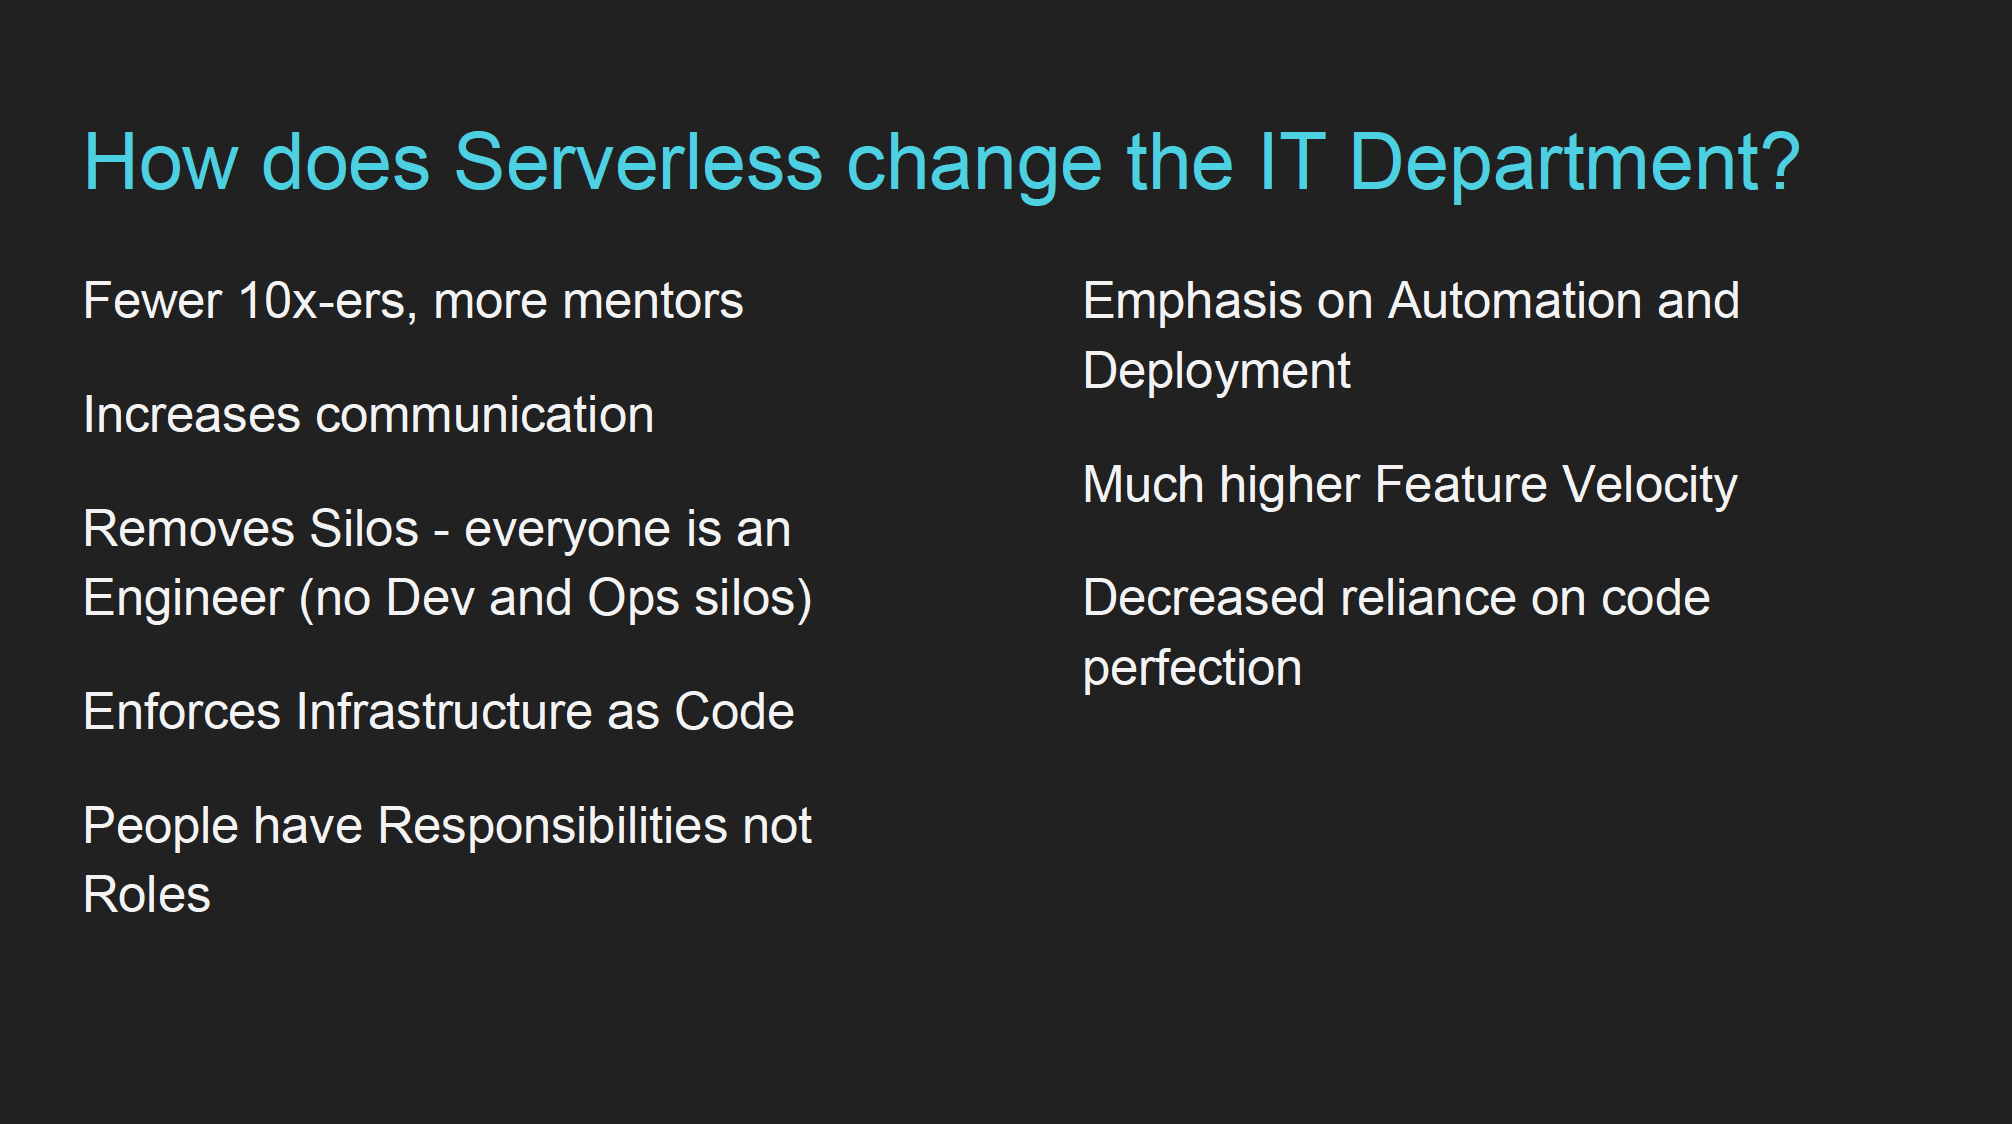 How does serverless change the IT department